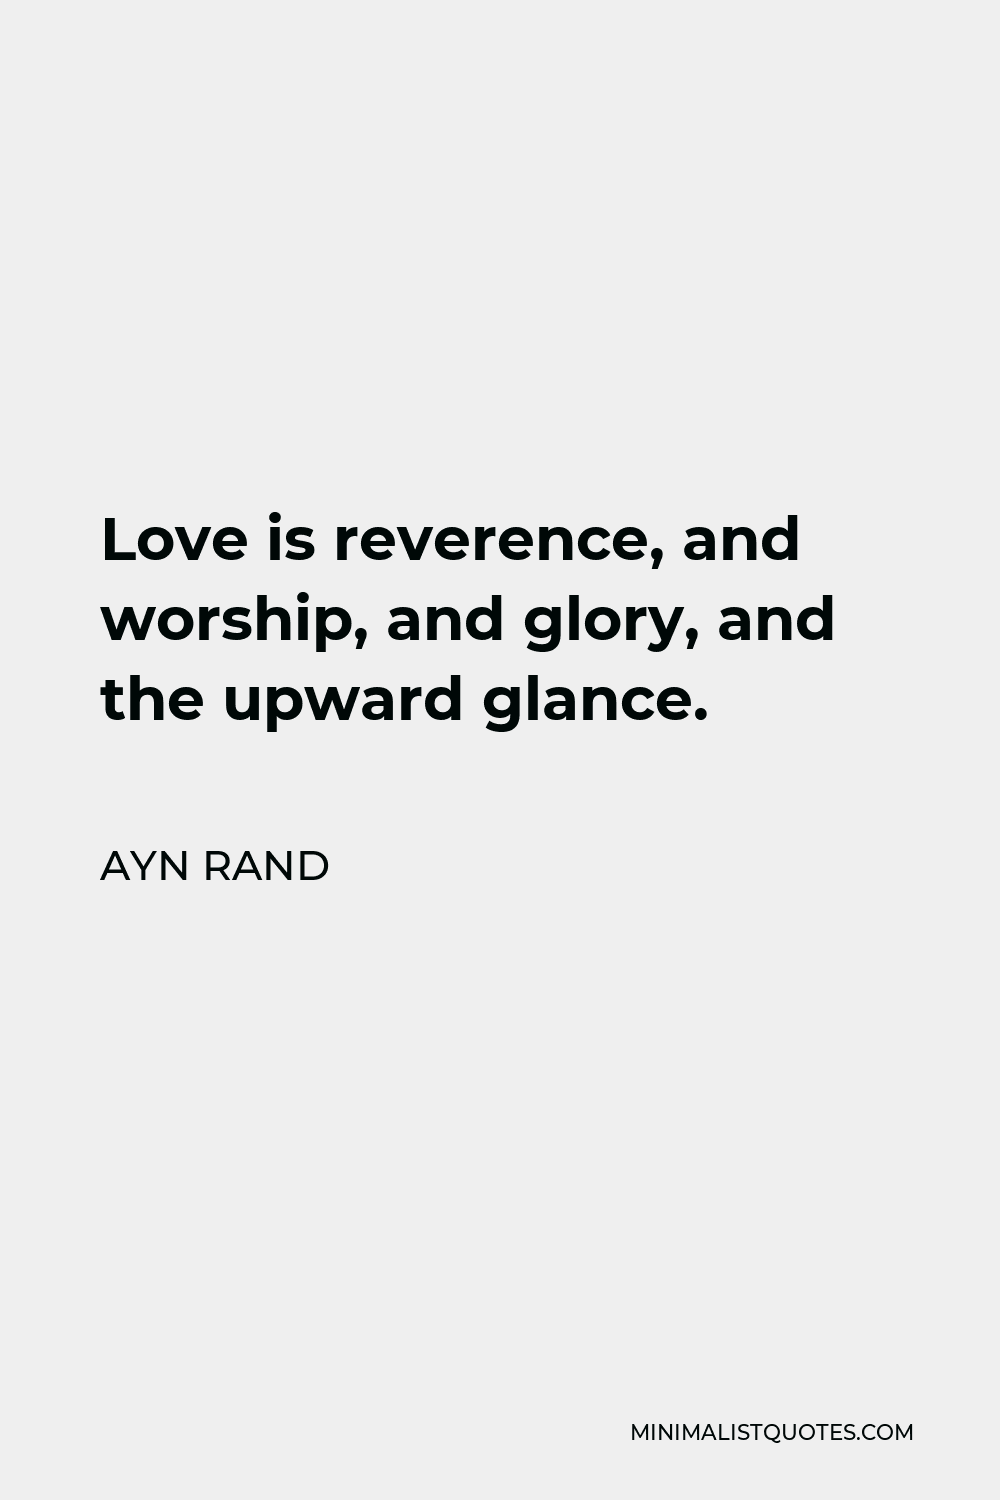 Ayn Rand Quote - Love is reverence, and worship, and glory, and the upward glance.